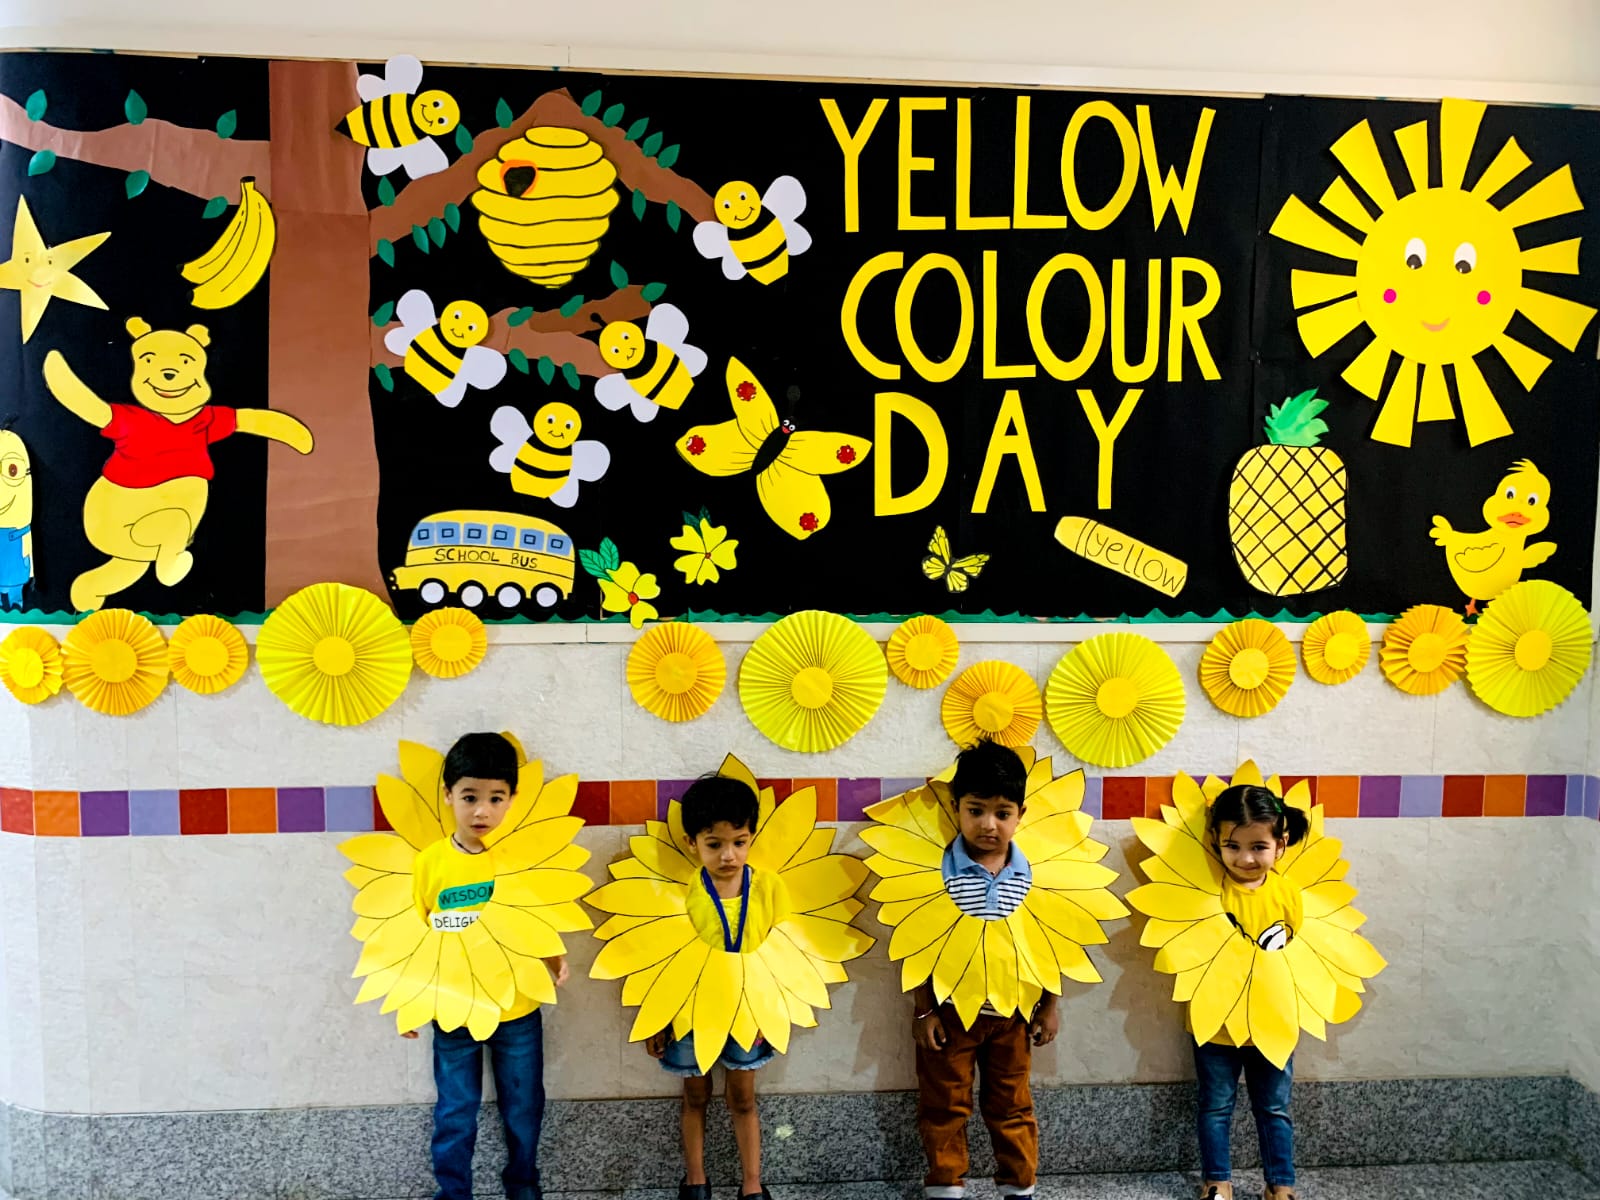 The Shriram Wonder Years sets off the ‘Yellow Day’ event with rambunctious children and guffaws